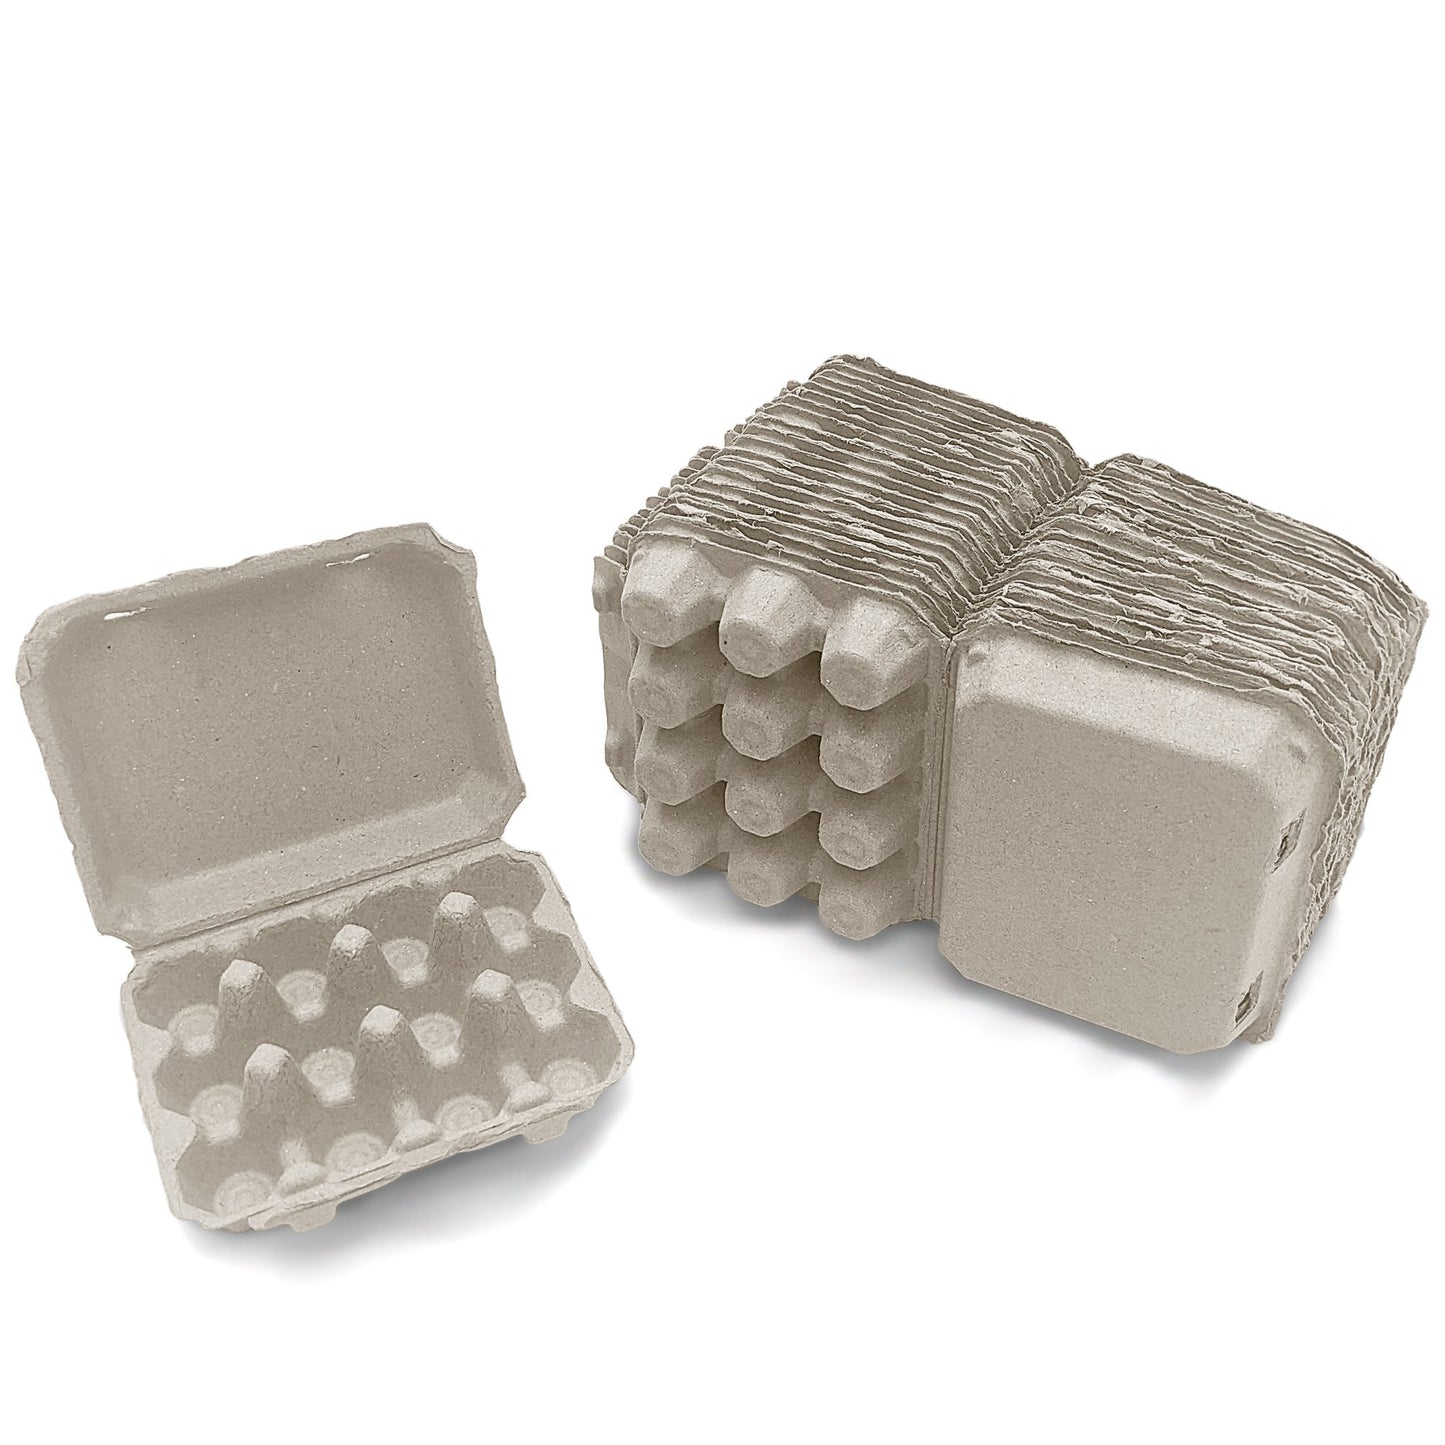 Henlay quail egg cartons are made from recycled cardboard. 